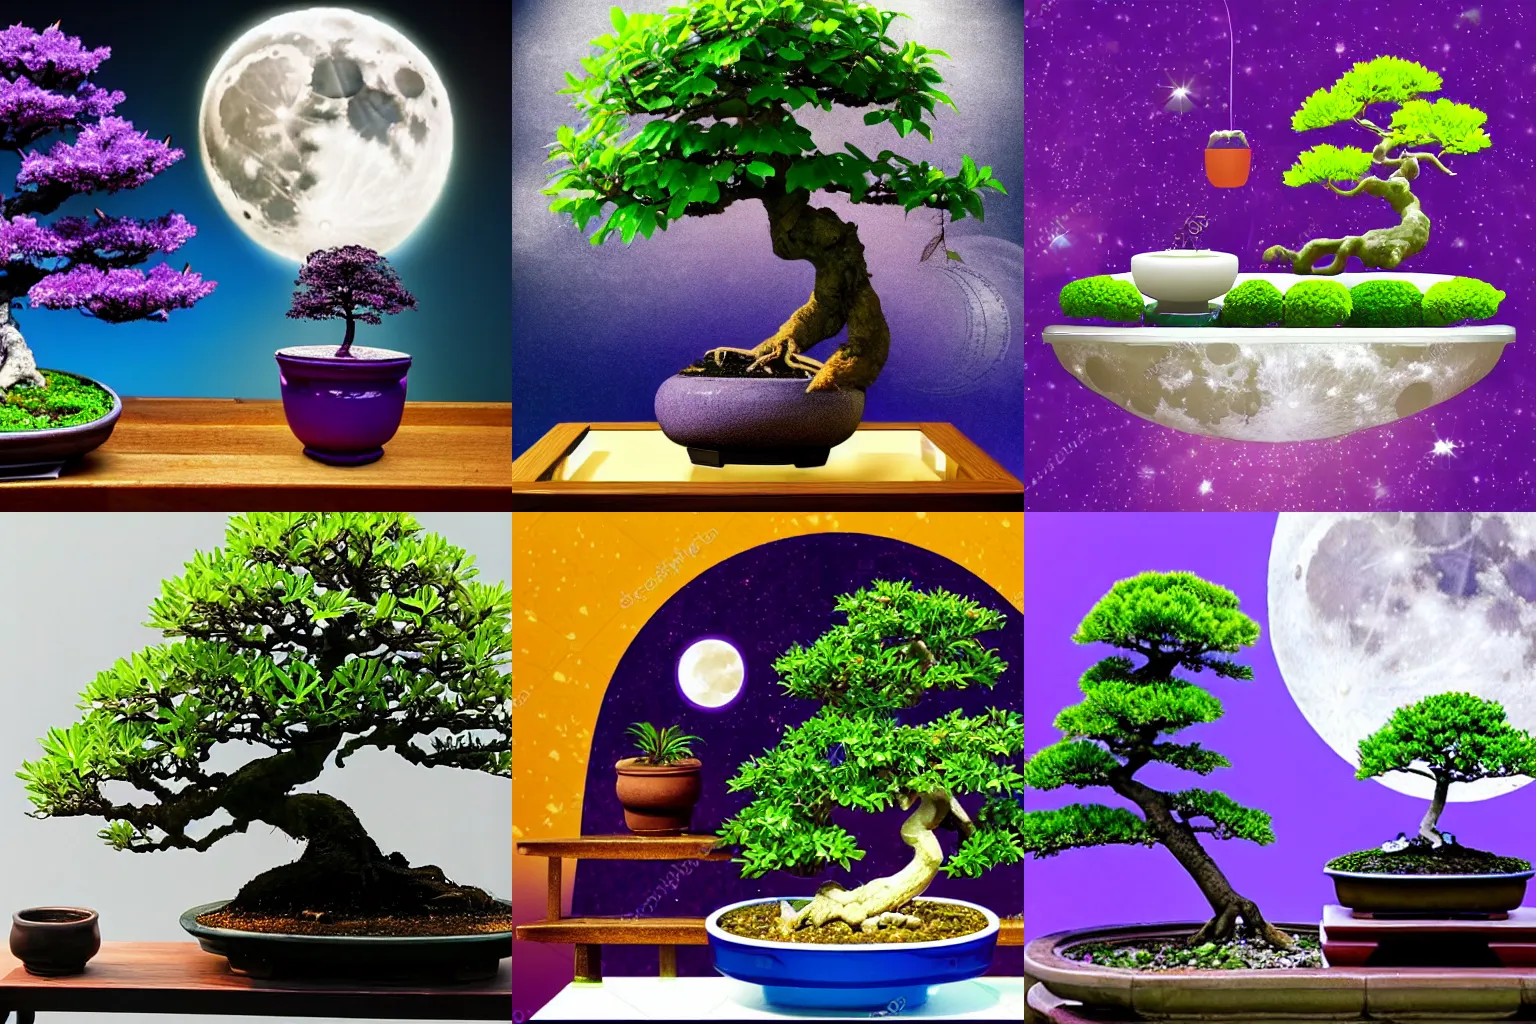 Prompt: moon resting under bonsai tree with purple leaf, holding a lemonade